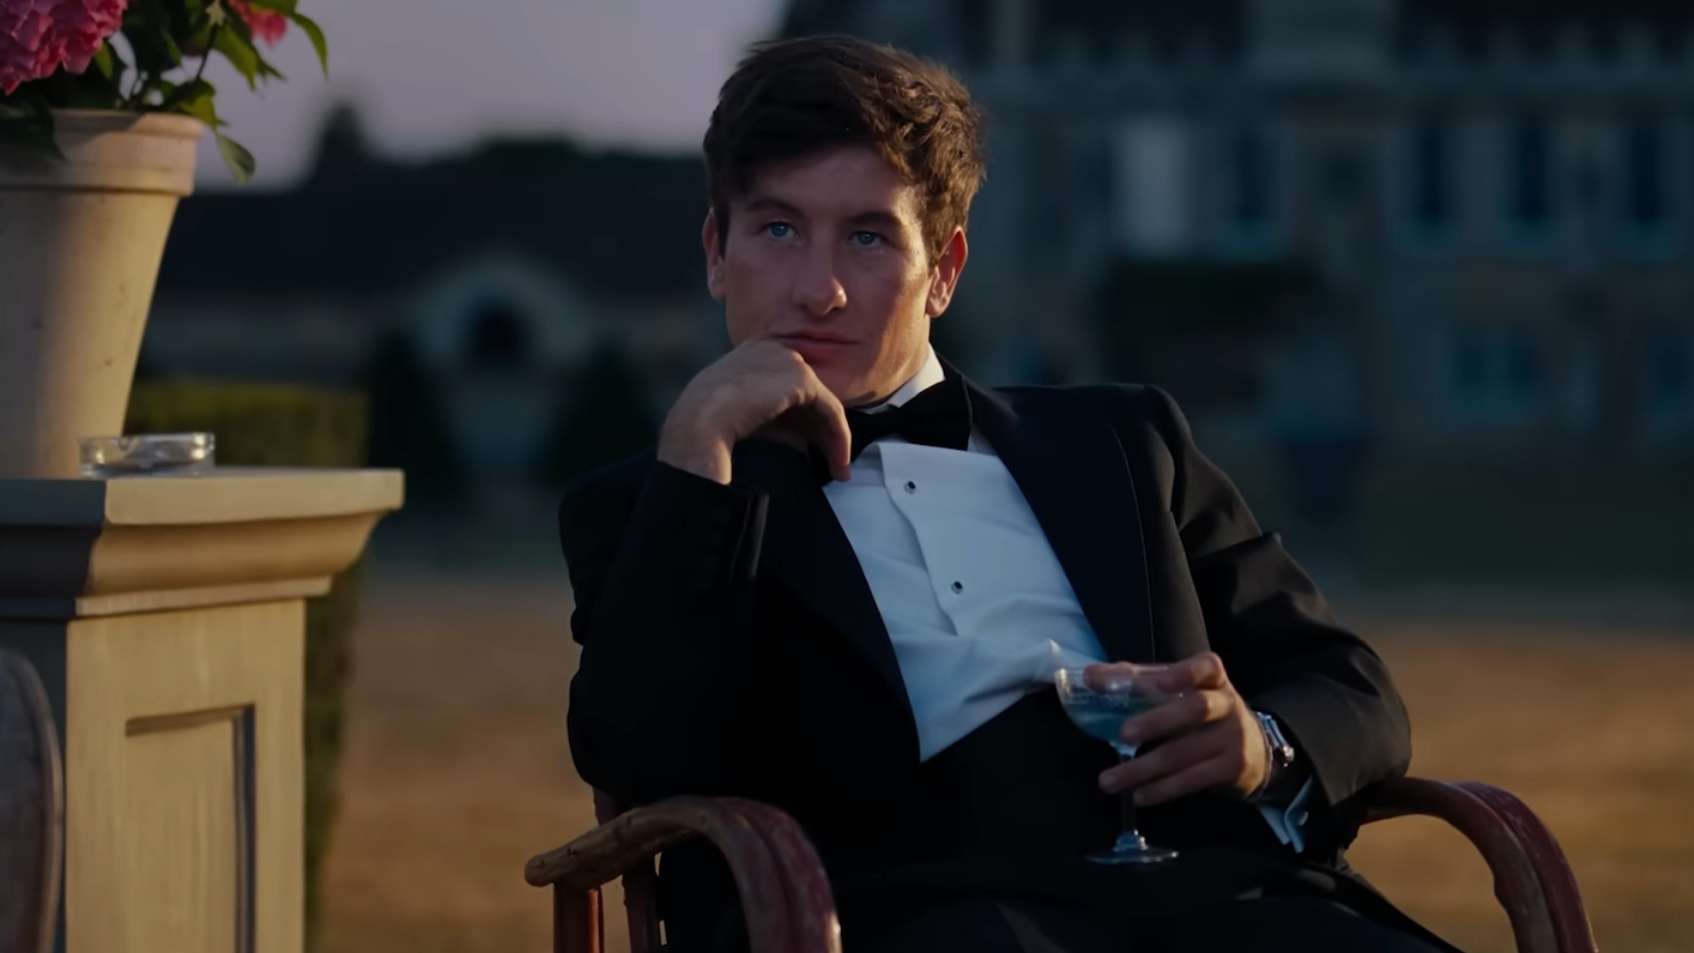 Barry Keoghan in a tuxedo with a cocktail drink